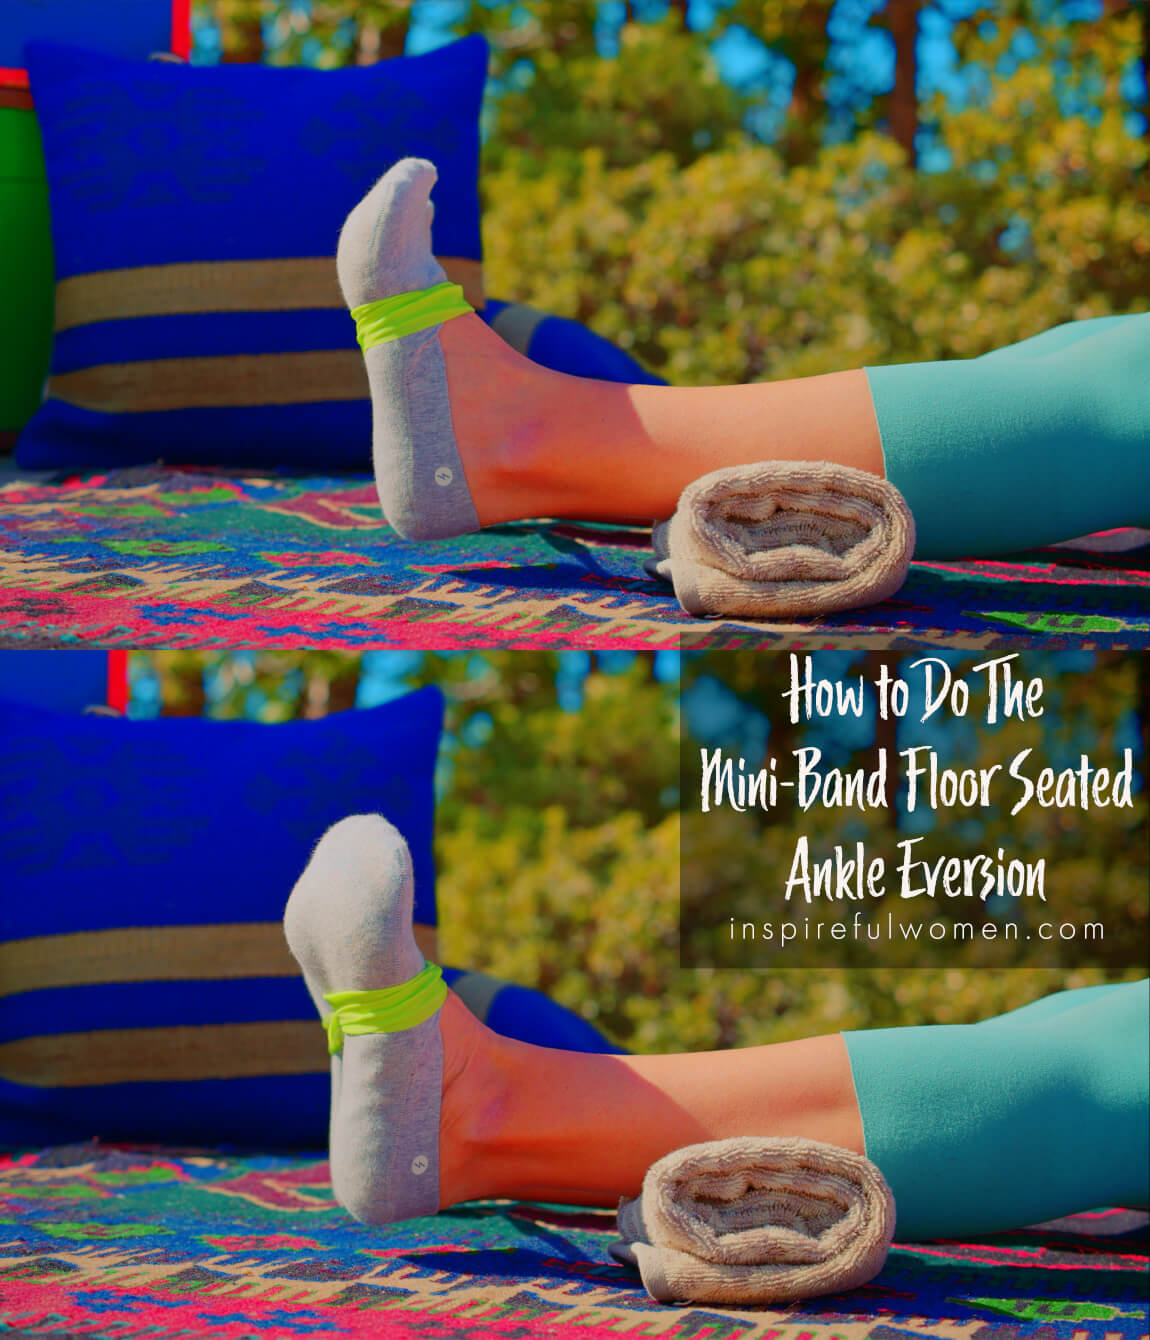 how-to-mini-band-floor-seated-ankle-eversion-lower-leg-exercise-at-home-proper-form